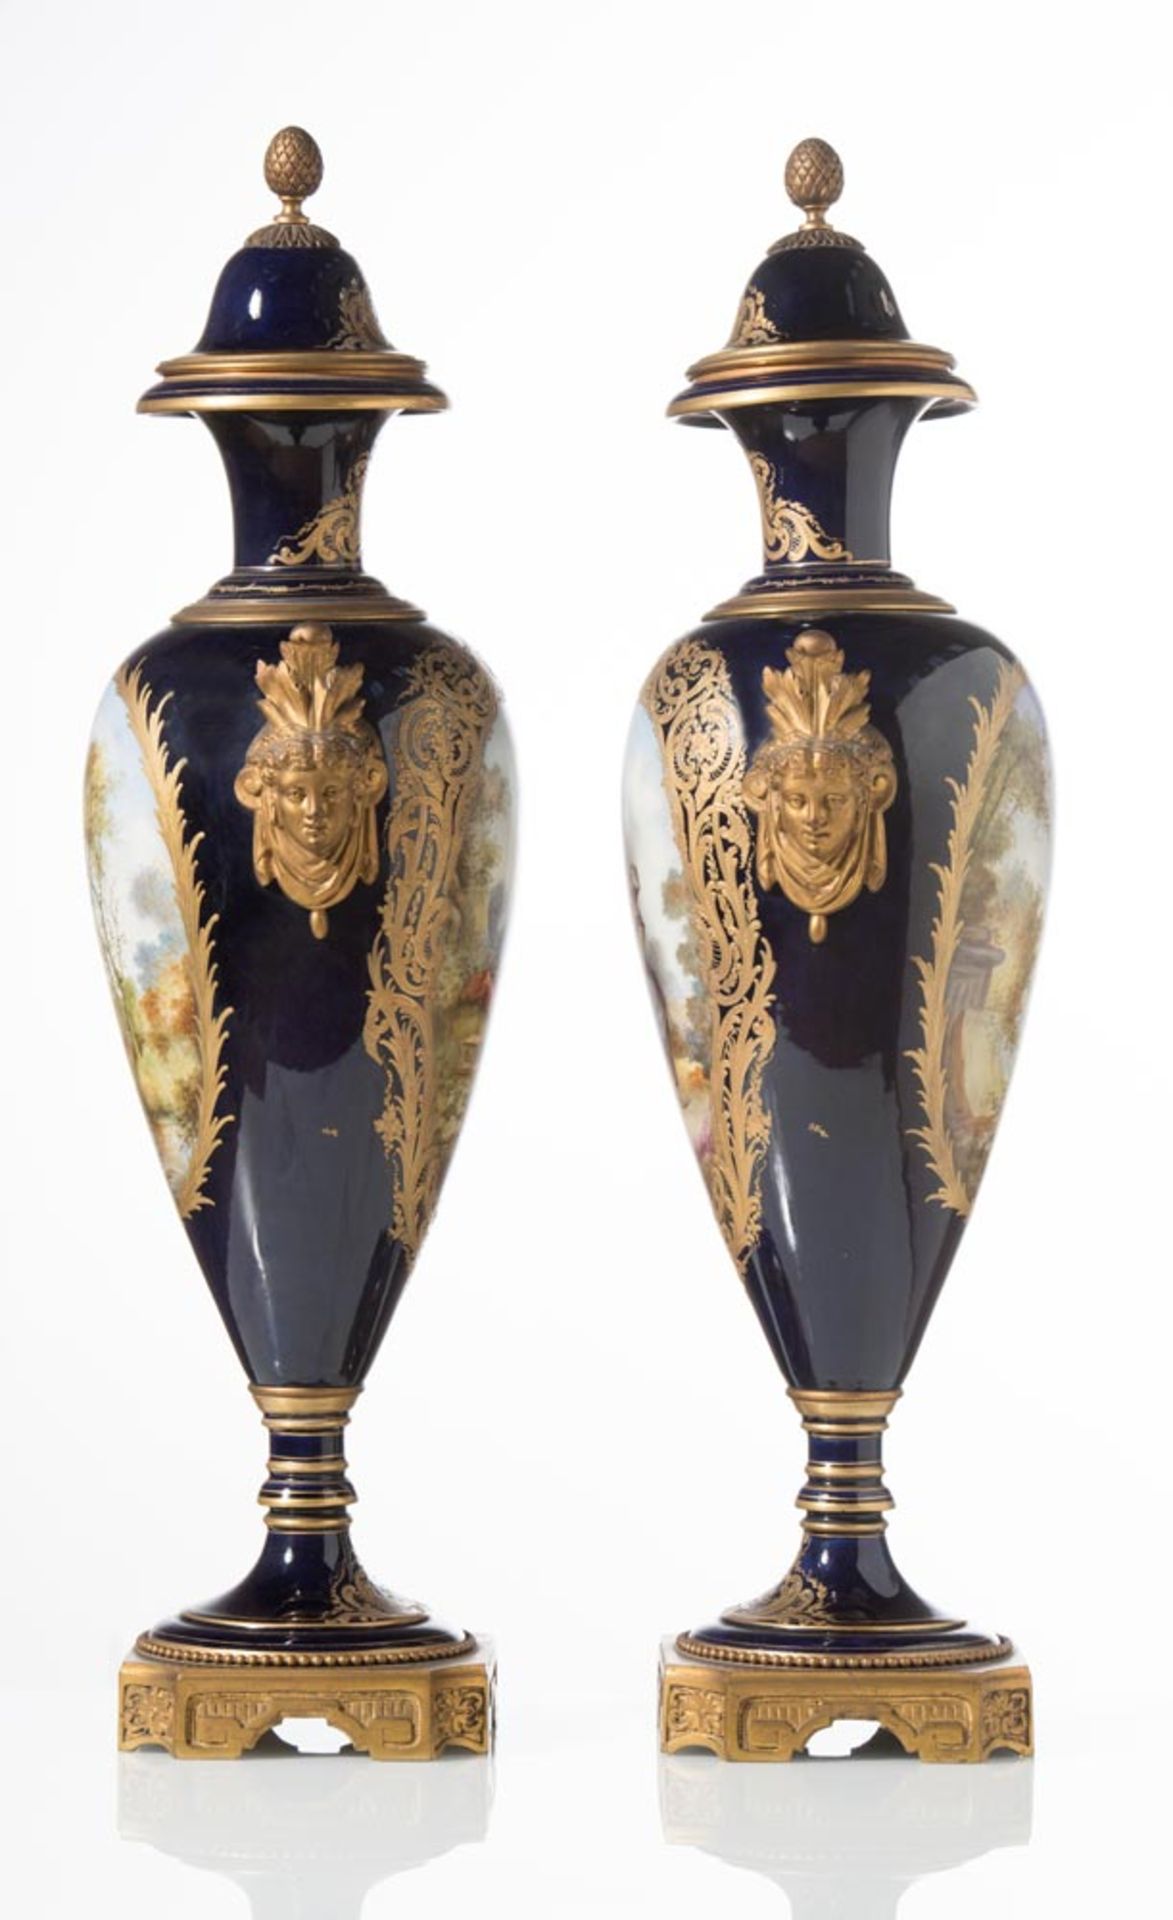 Pair of porcelain Sevres vase, France, 20th Century - Image 2 of 2